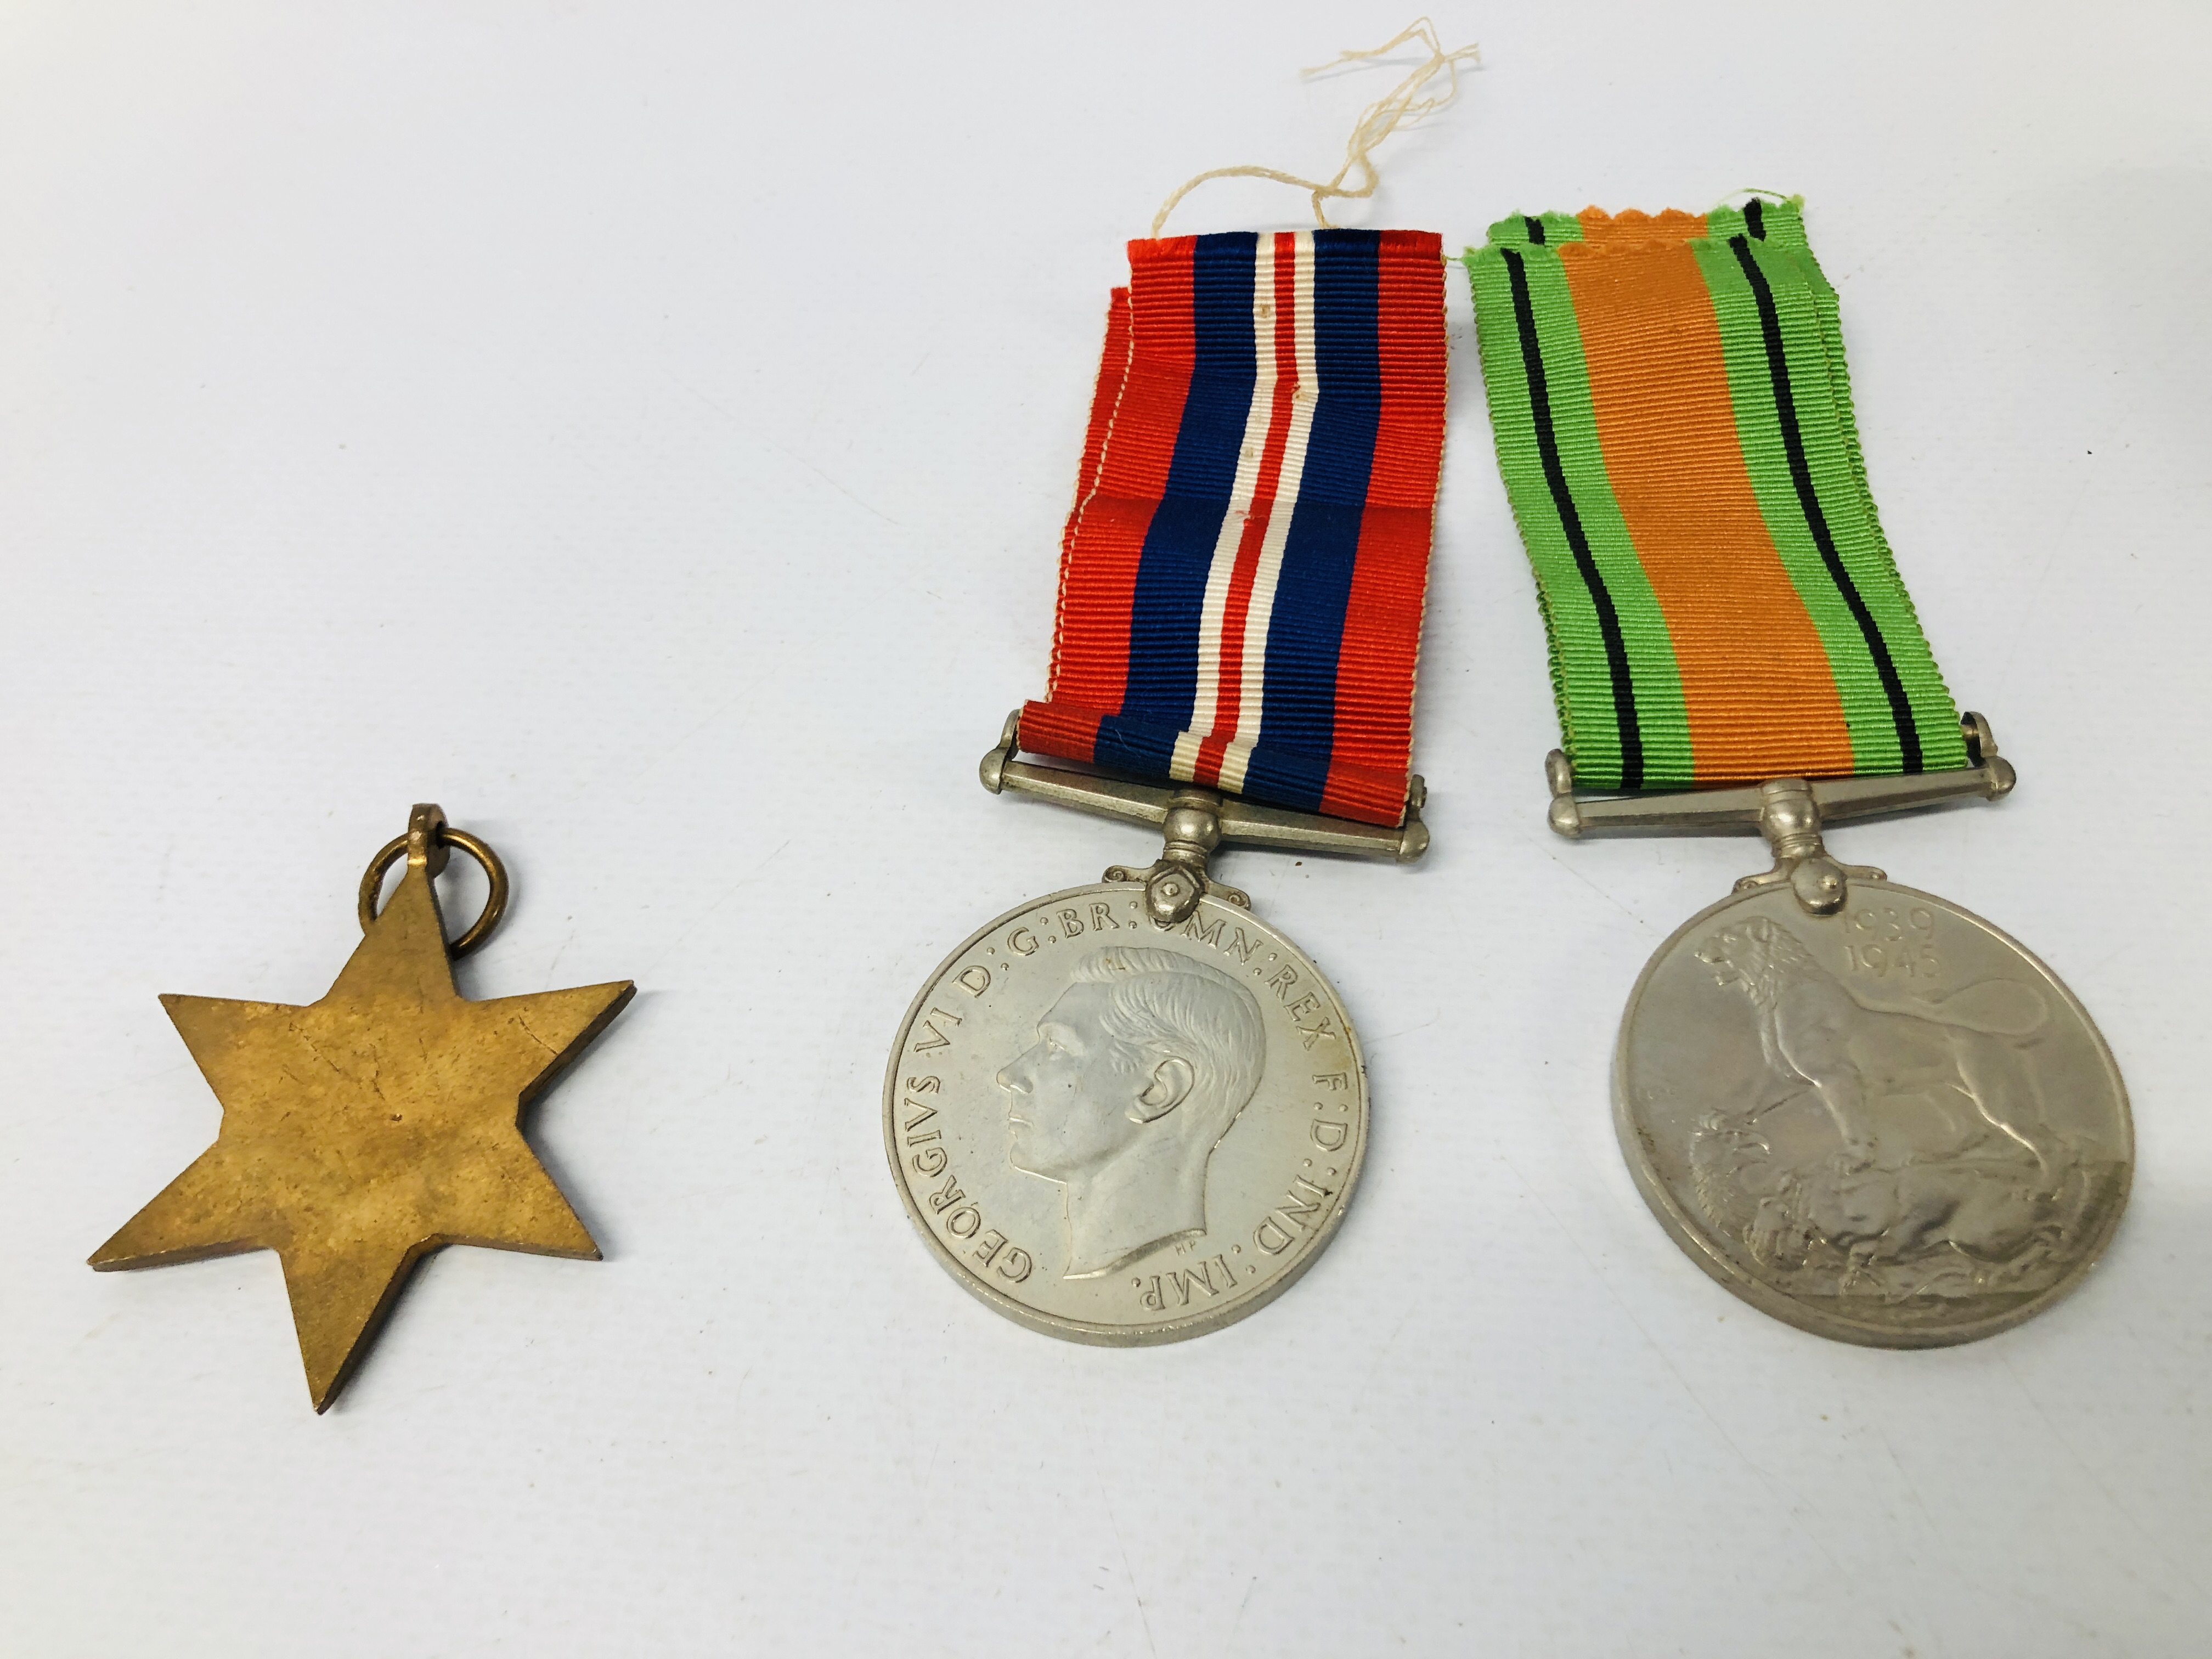 TWO WWII MEDALS, TWO WWII DEFENCE MEDALS, TWO 39-45 STARS, AN AFRICA STAR AND A BURMA STAR, - Image 7 of 7